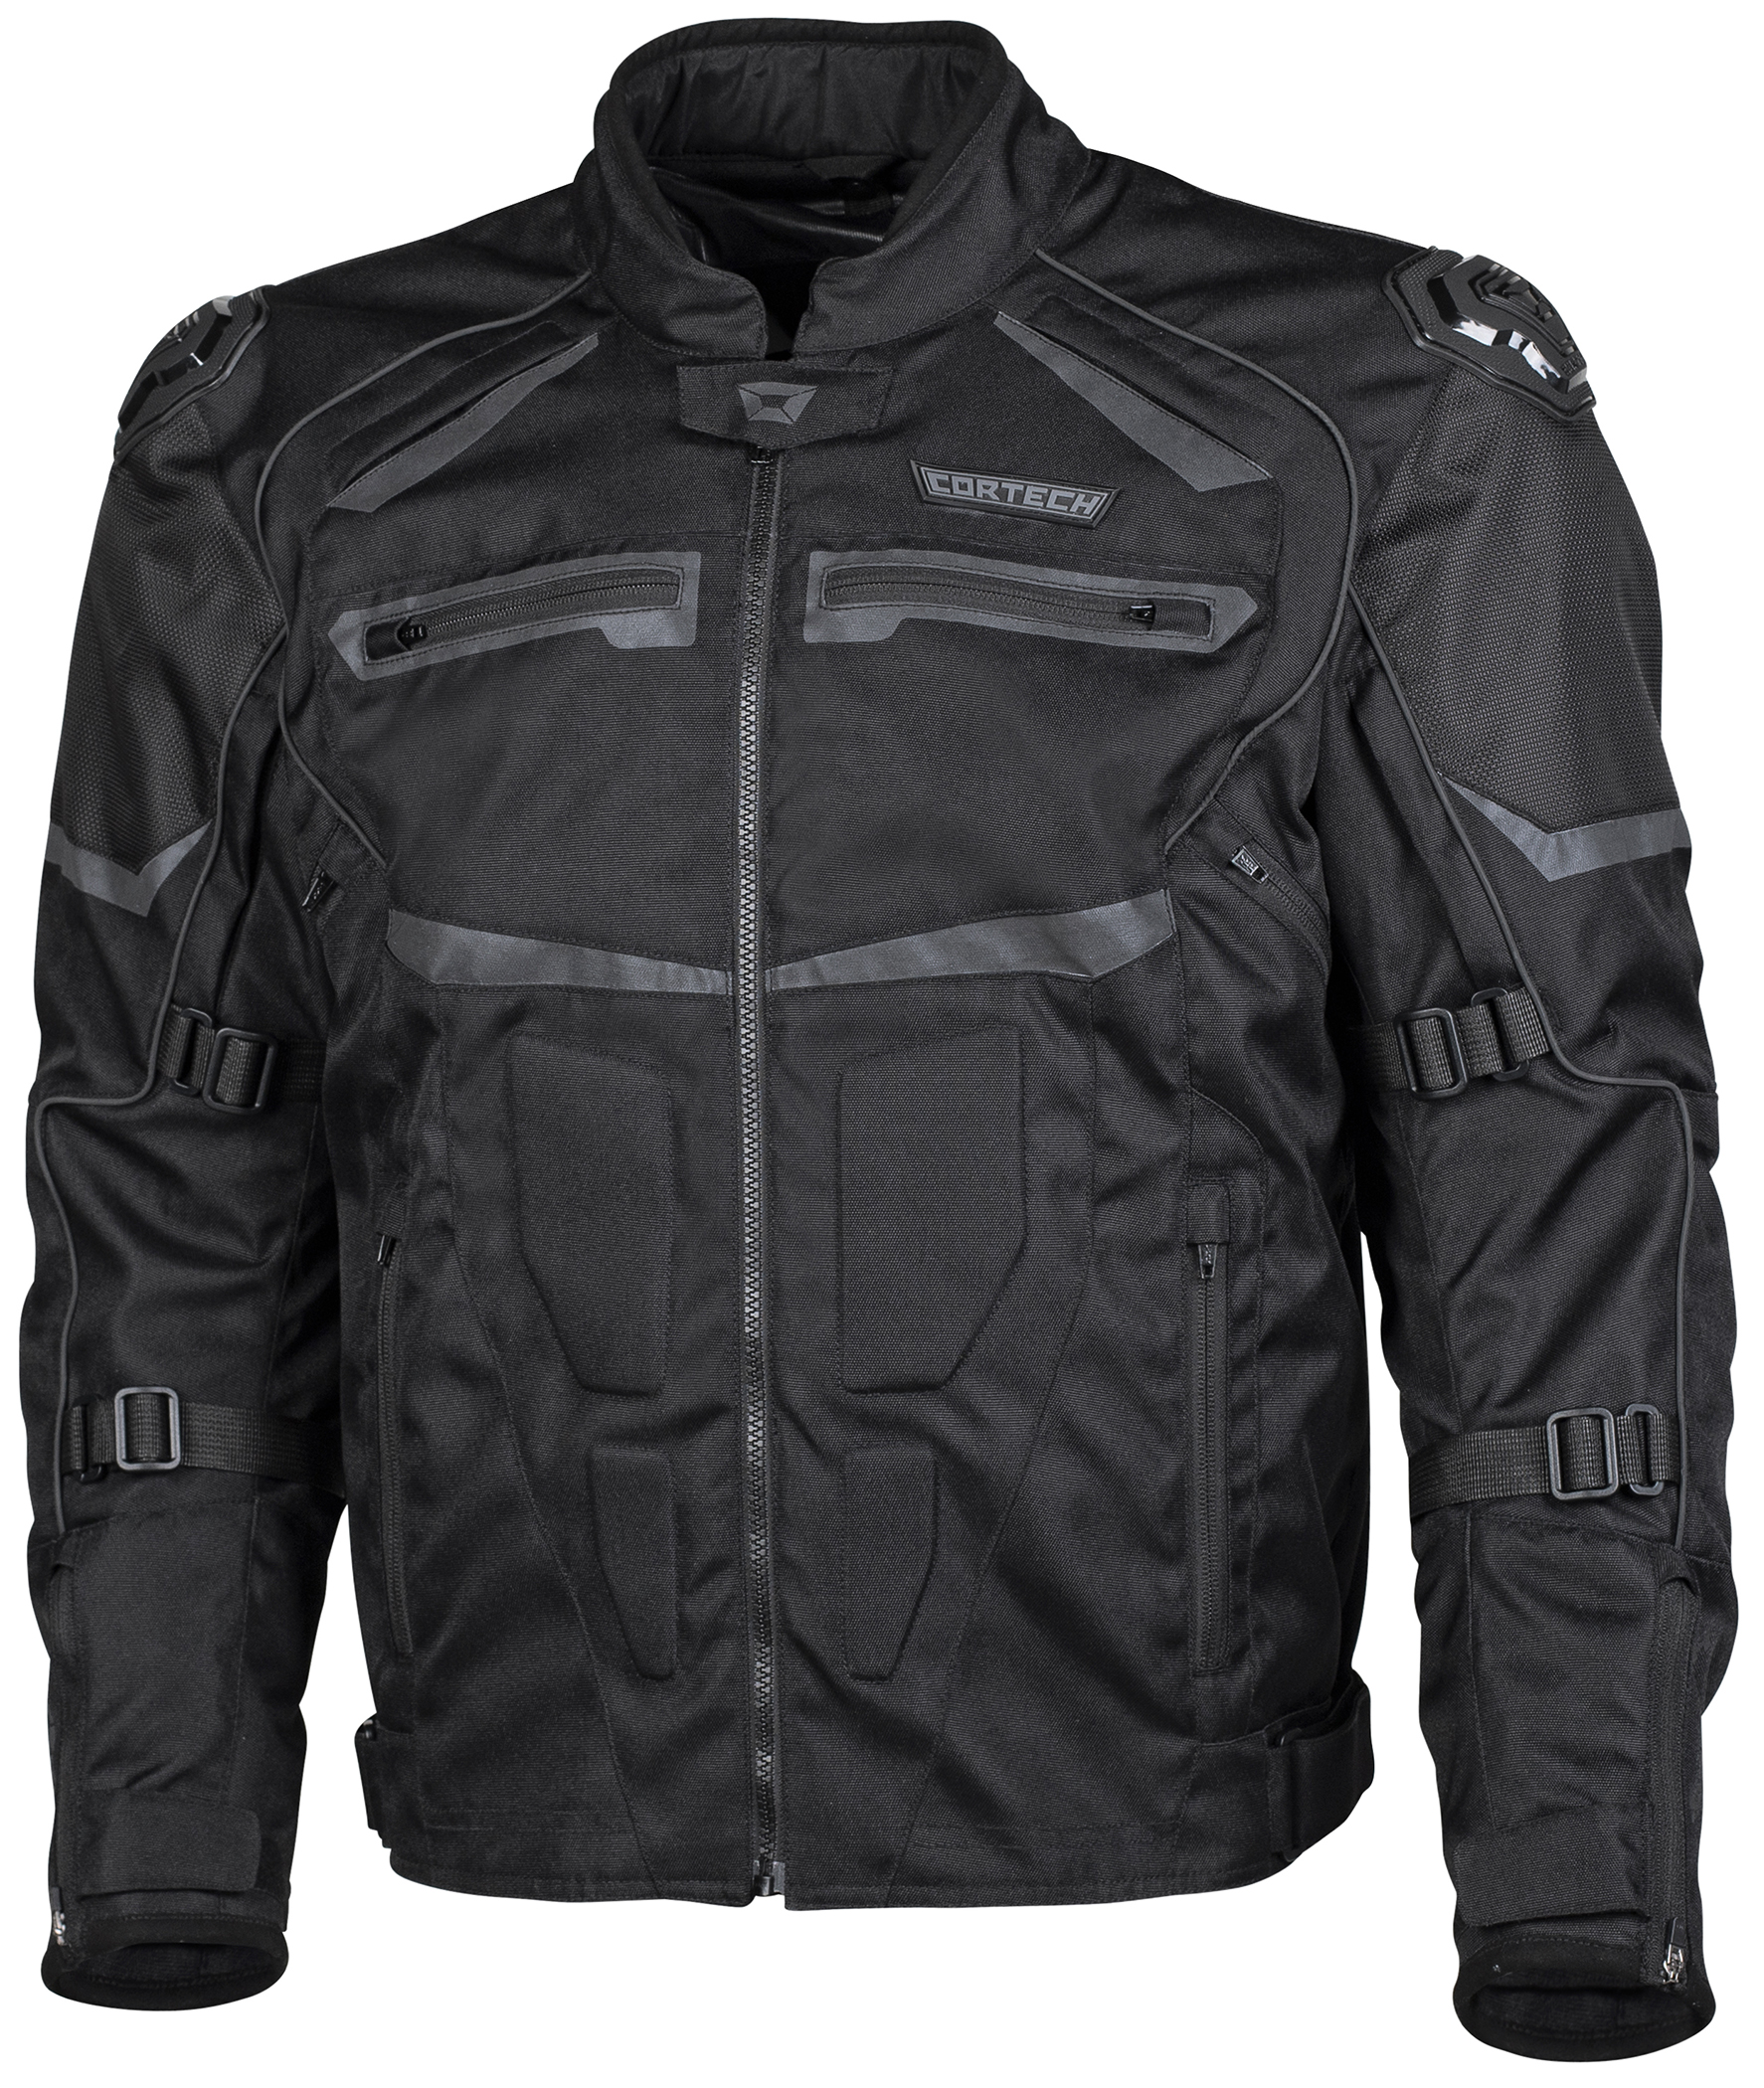 Hyper-Tec Armored Motorcycle Riding Jacket Black 4X-Large - Click Image to Close